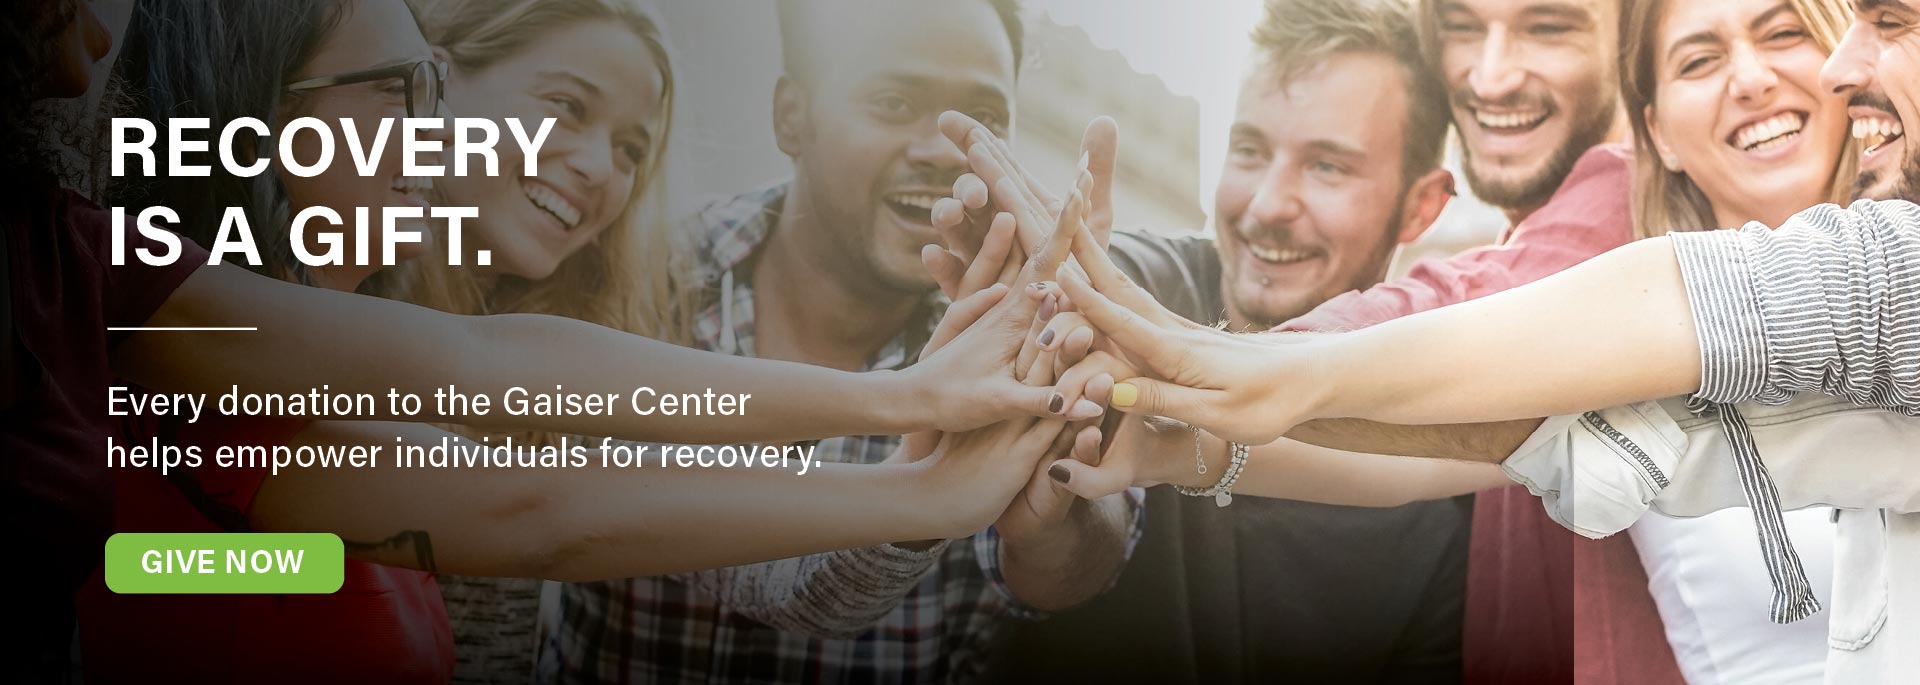 Recovery is a gift. Donate Today to the Ellen o'Brien Gaiser Center.